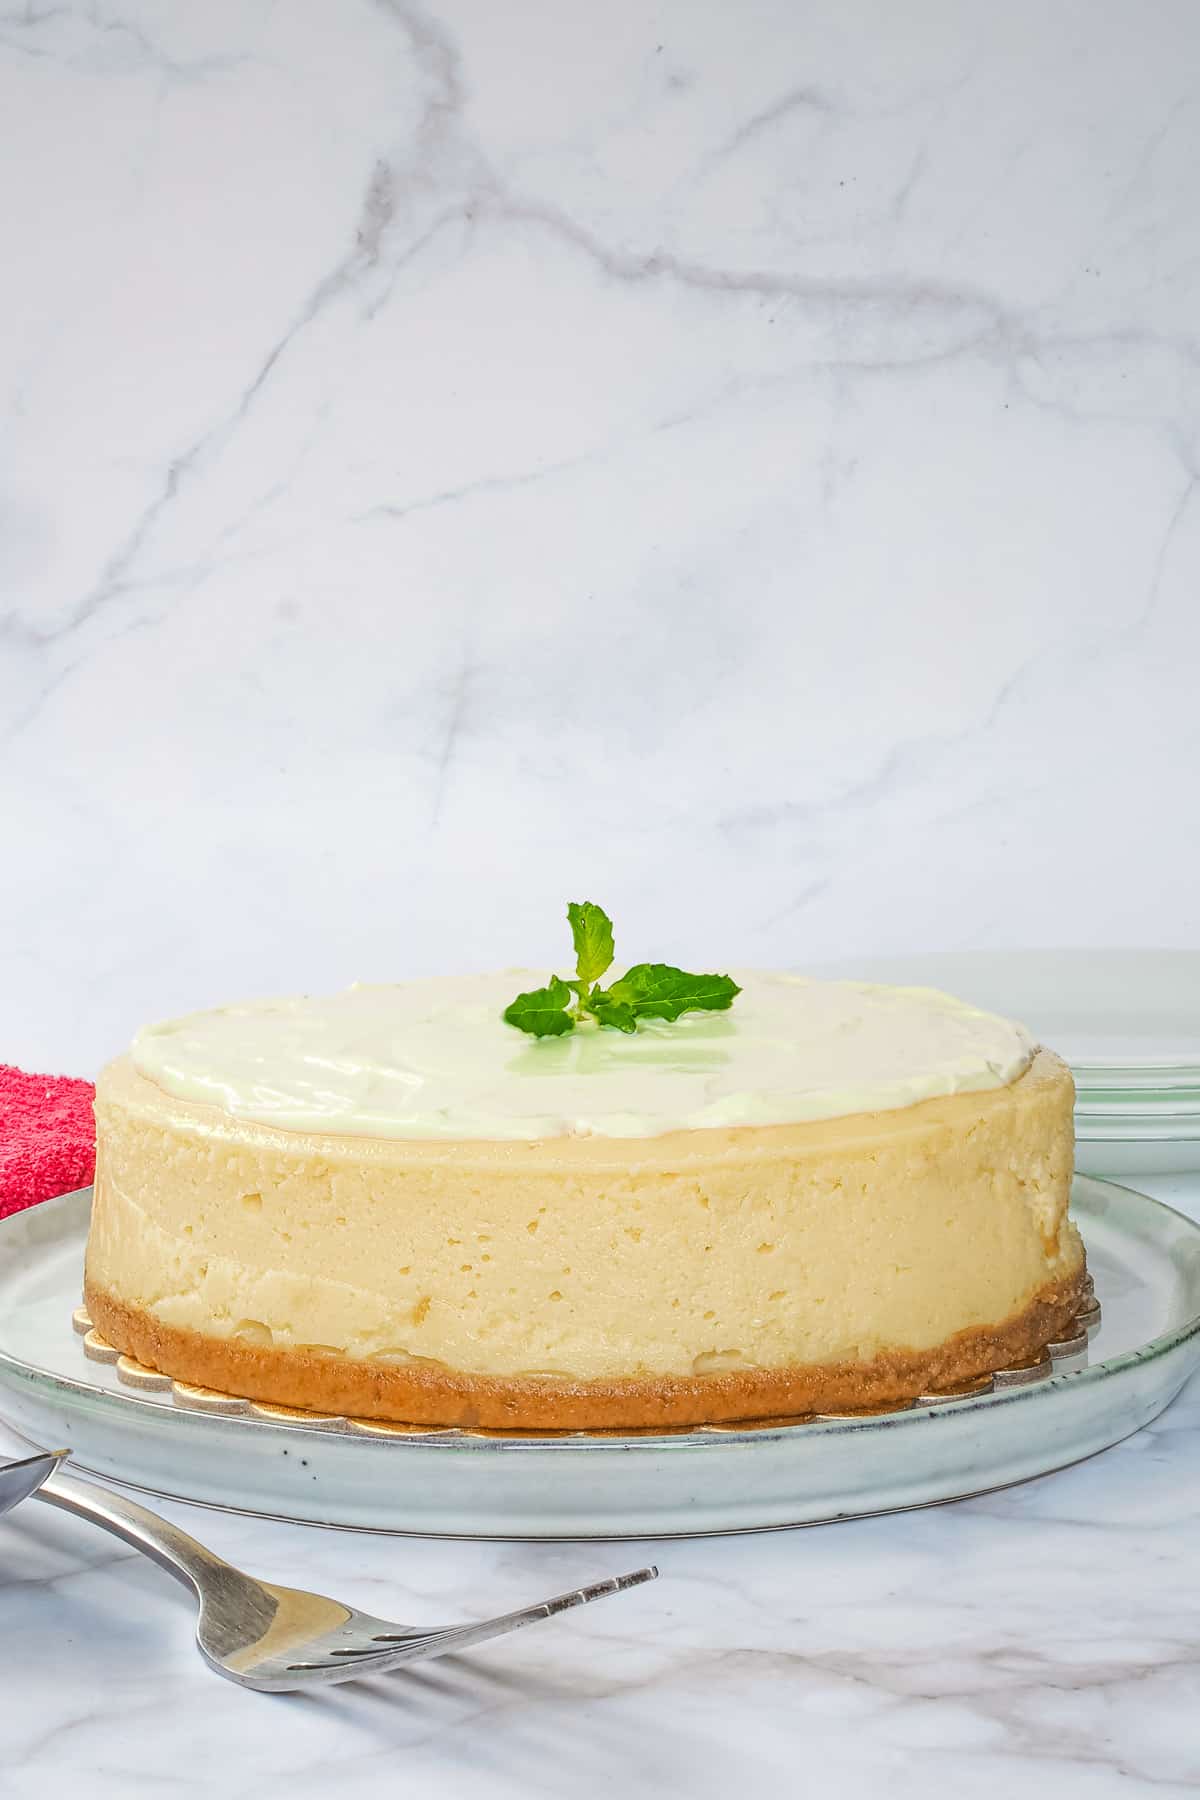 A round classic New York cheesecake with sour cream topping